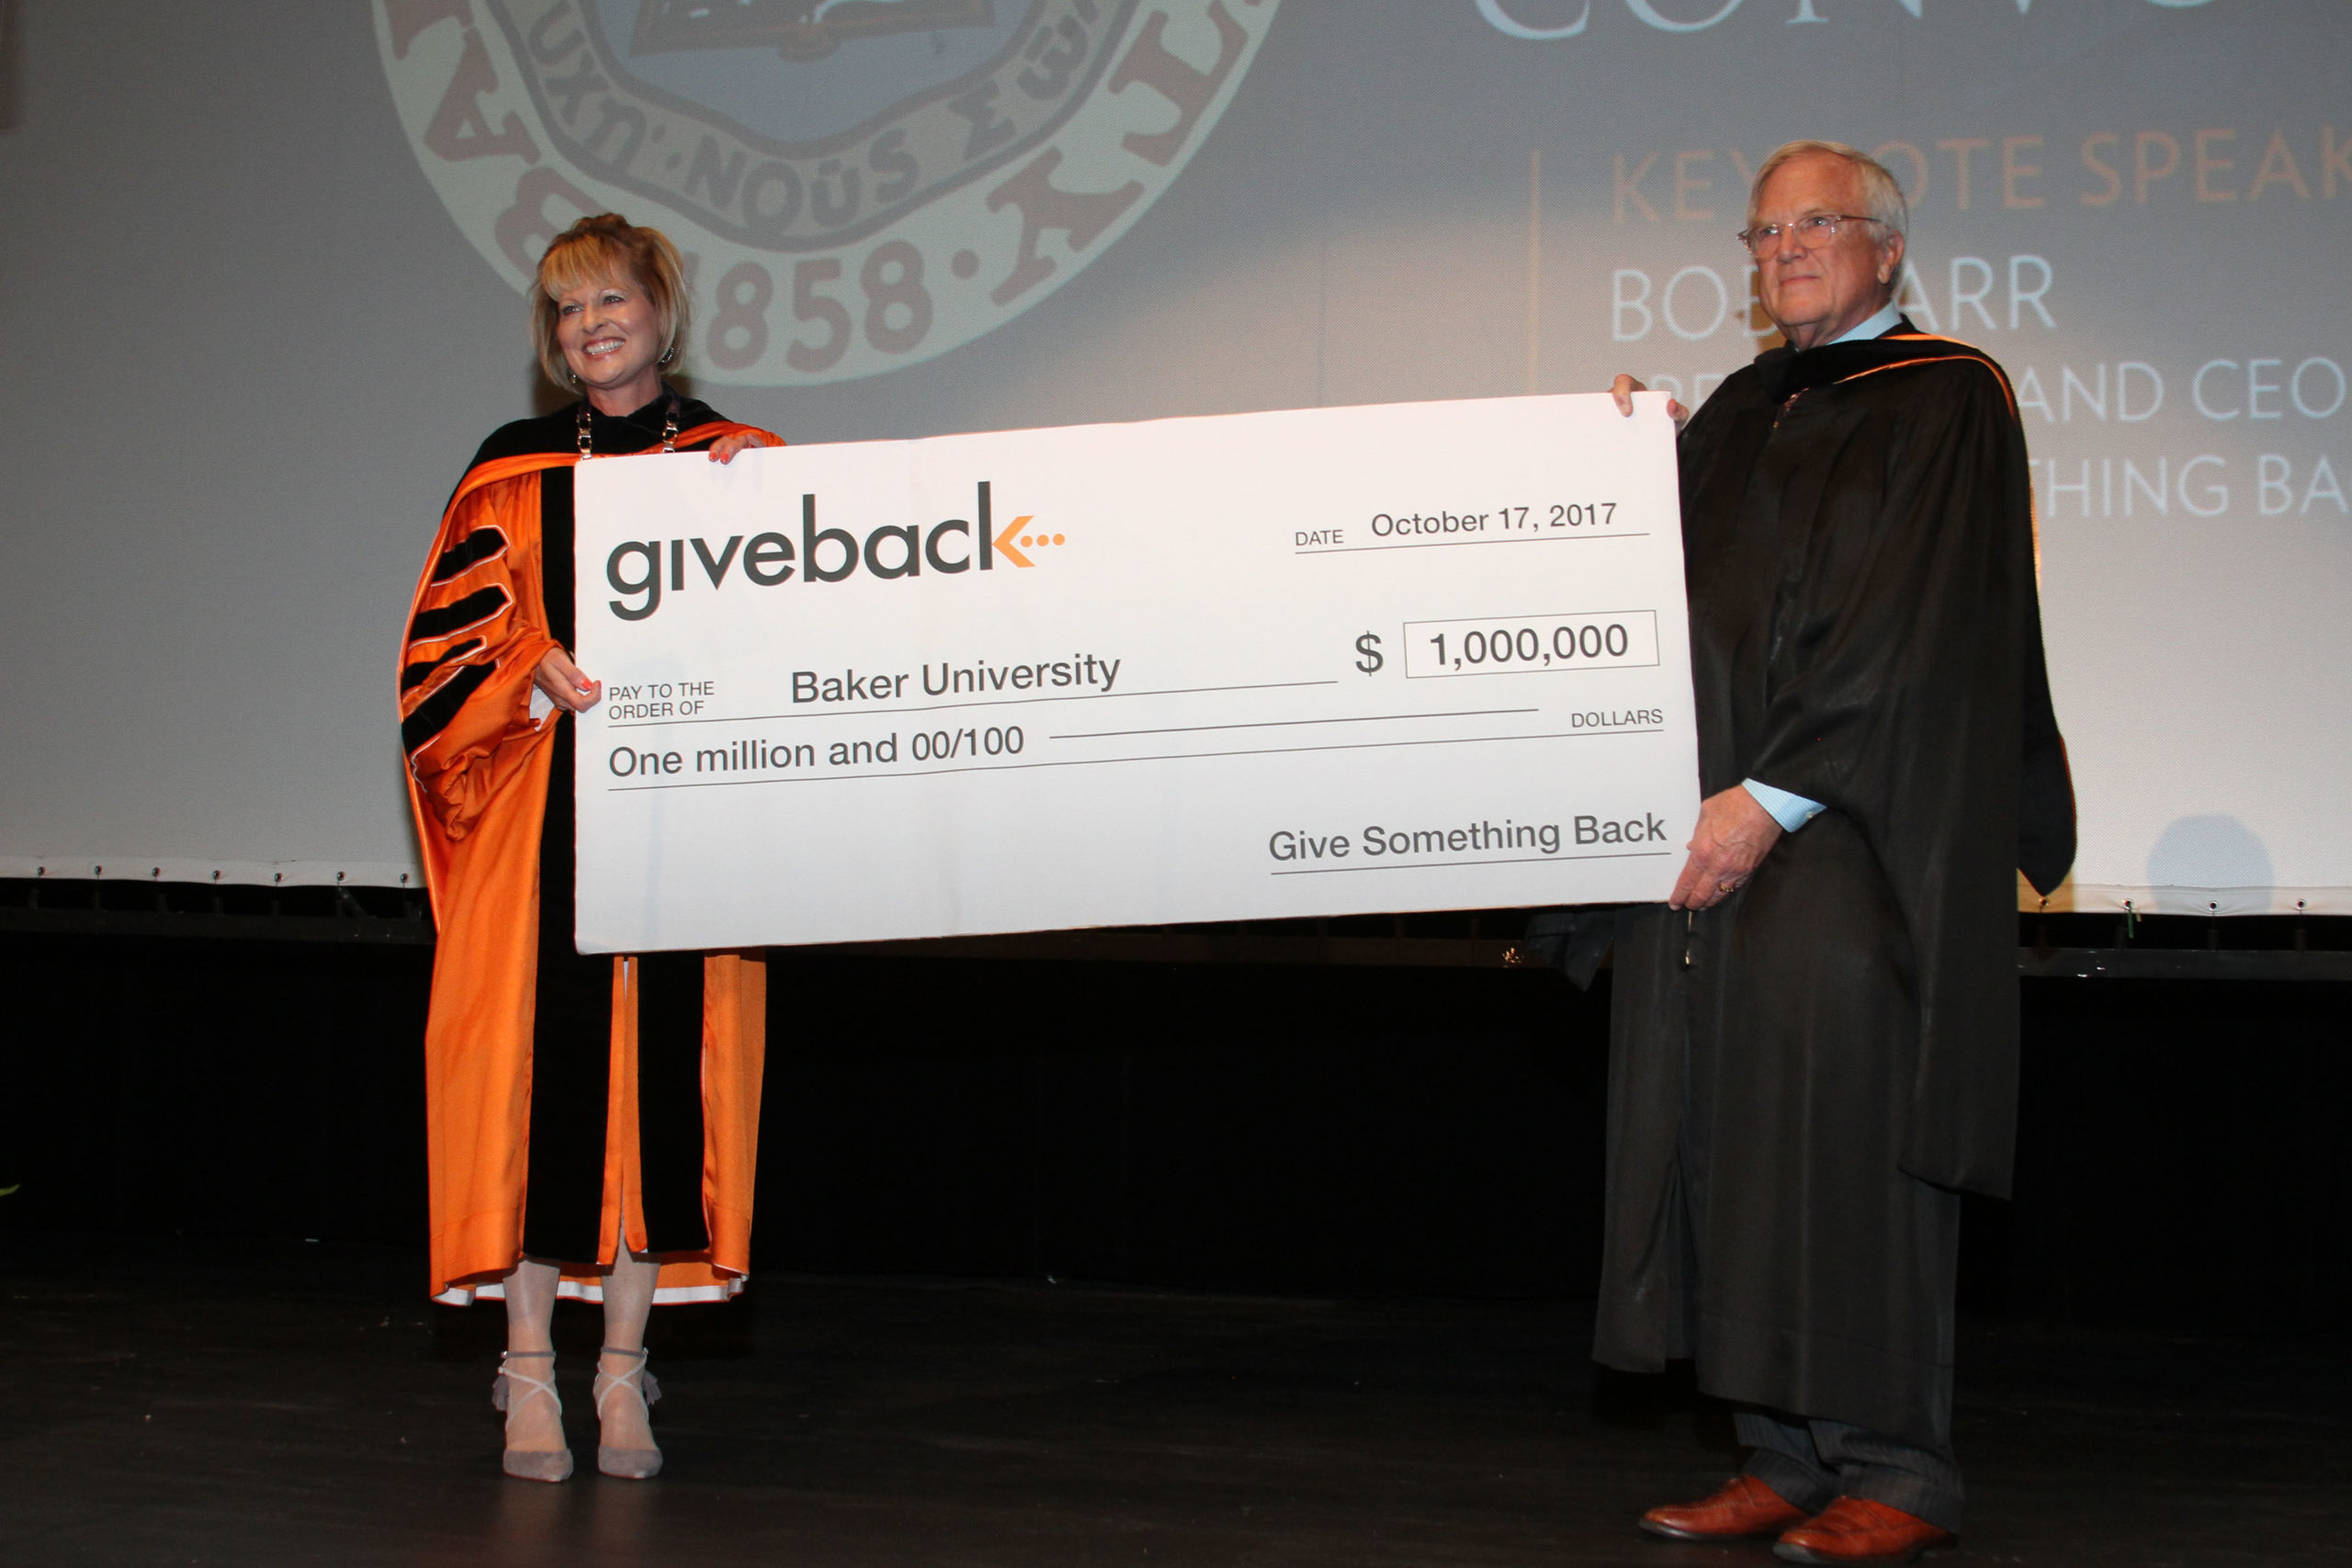 Dr. Murray and Bob Carr holding a check for one million dollars to Baker University.